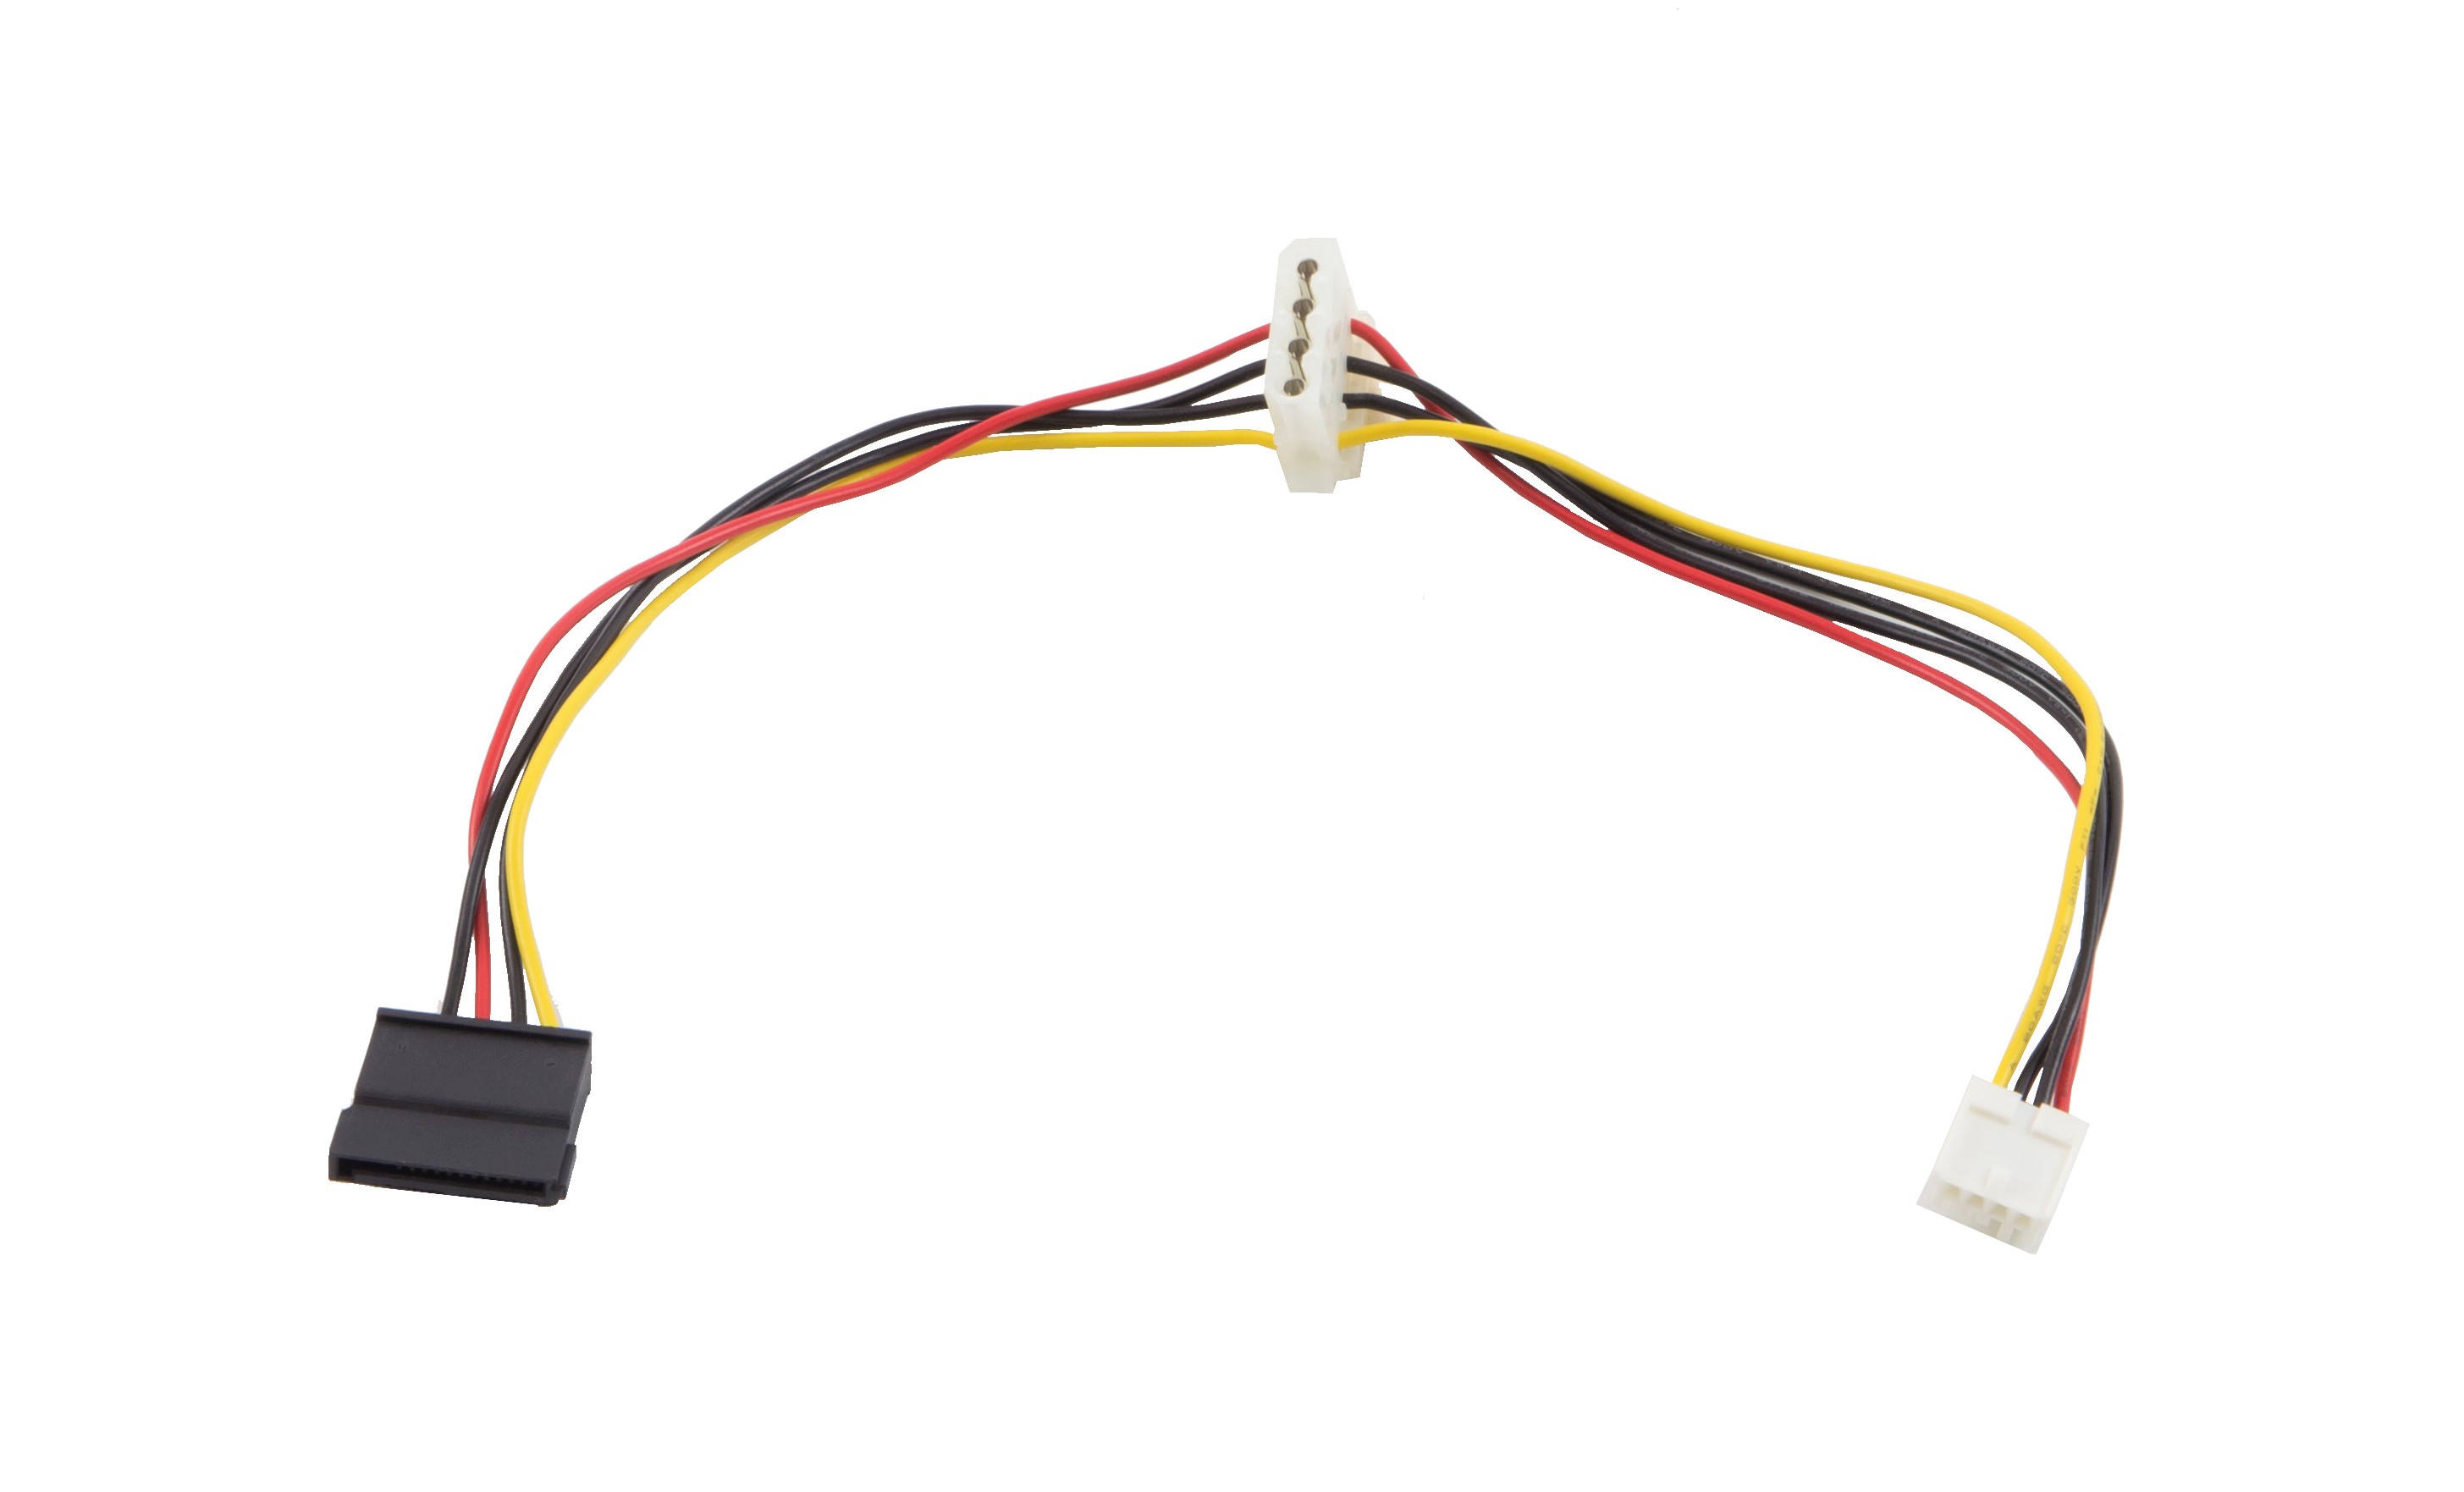 SATA POWER CABLE FOR HDD & CARD  |Products|Accessories|Cable & Cord